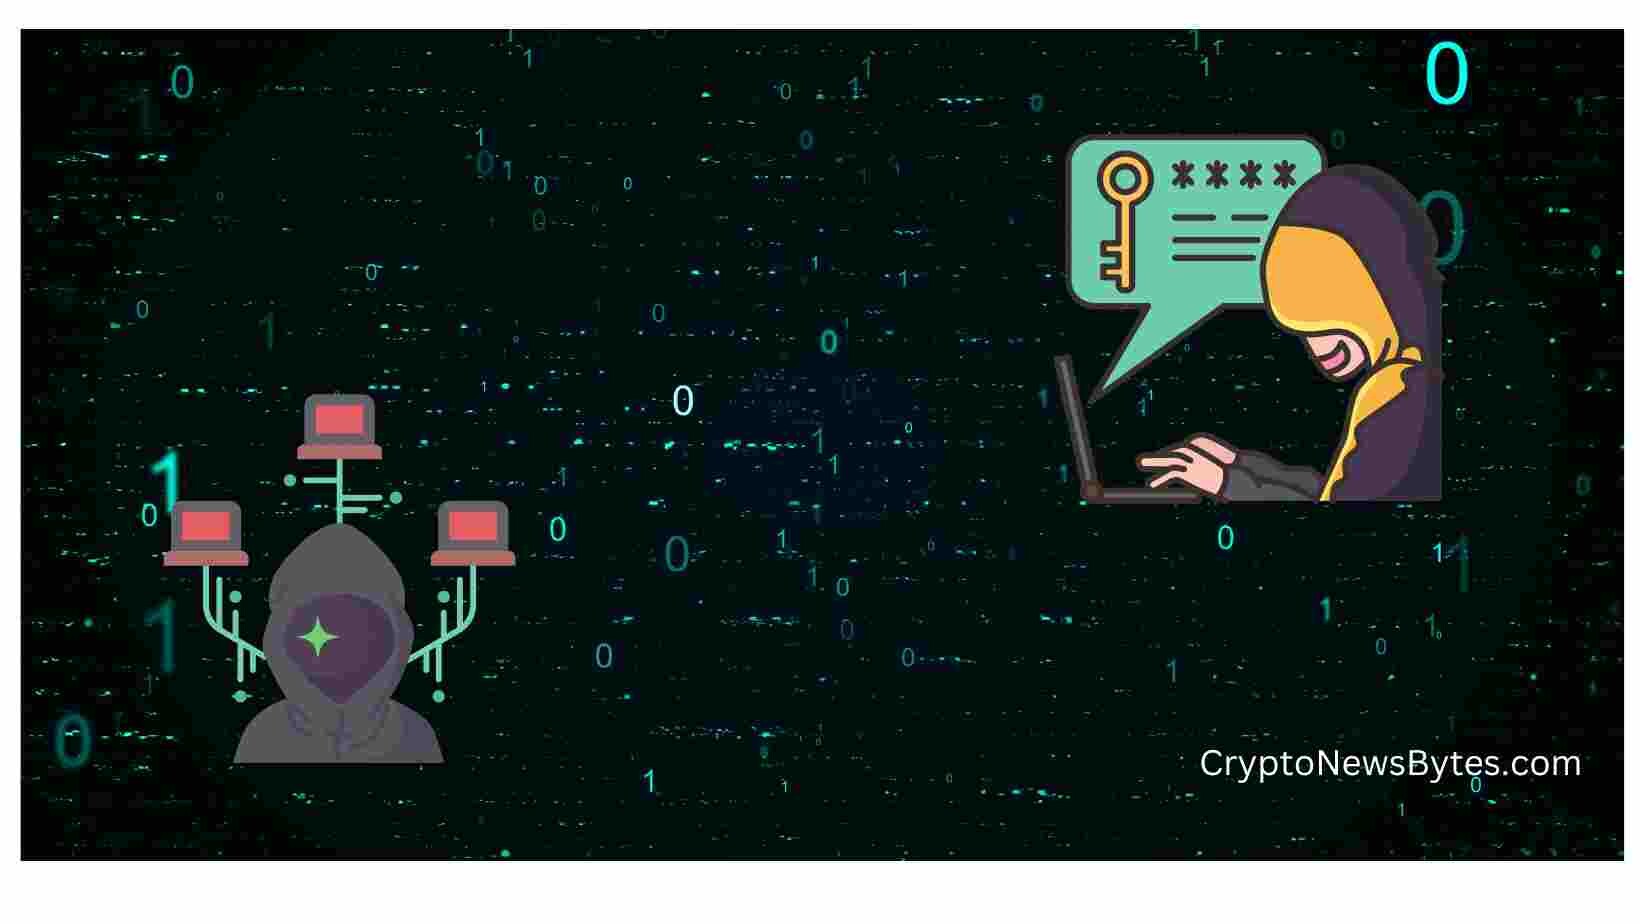 CRYPTONEWSBYTES.COM Hack Atomic Wallet Cyber Heist: Over $35 Million in Crypto Stolen in a High-Stakes Security Breach  